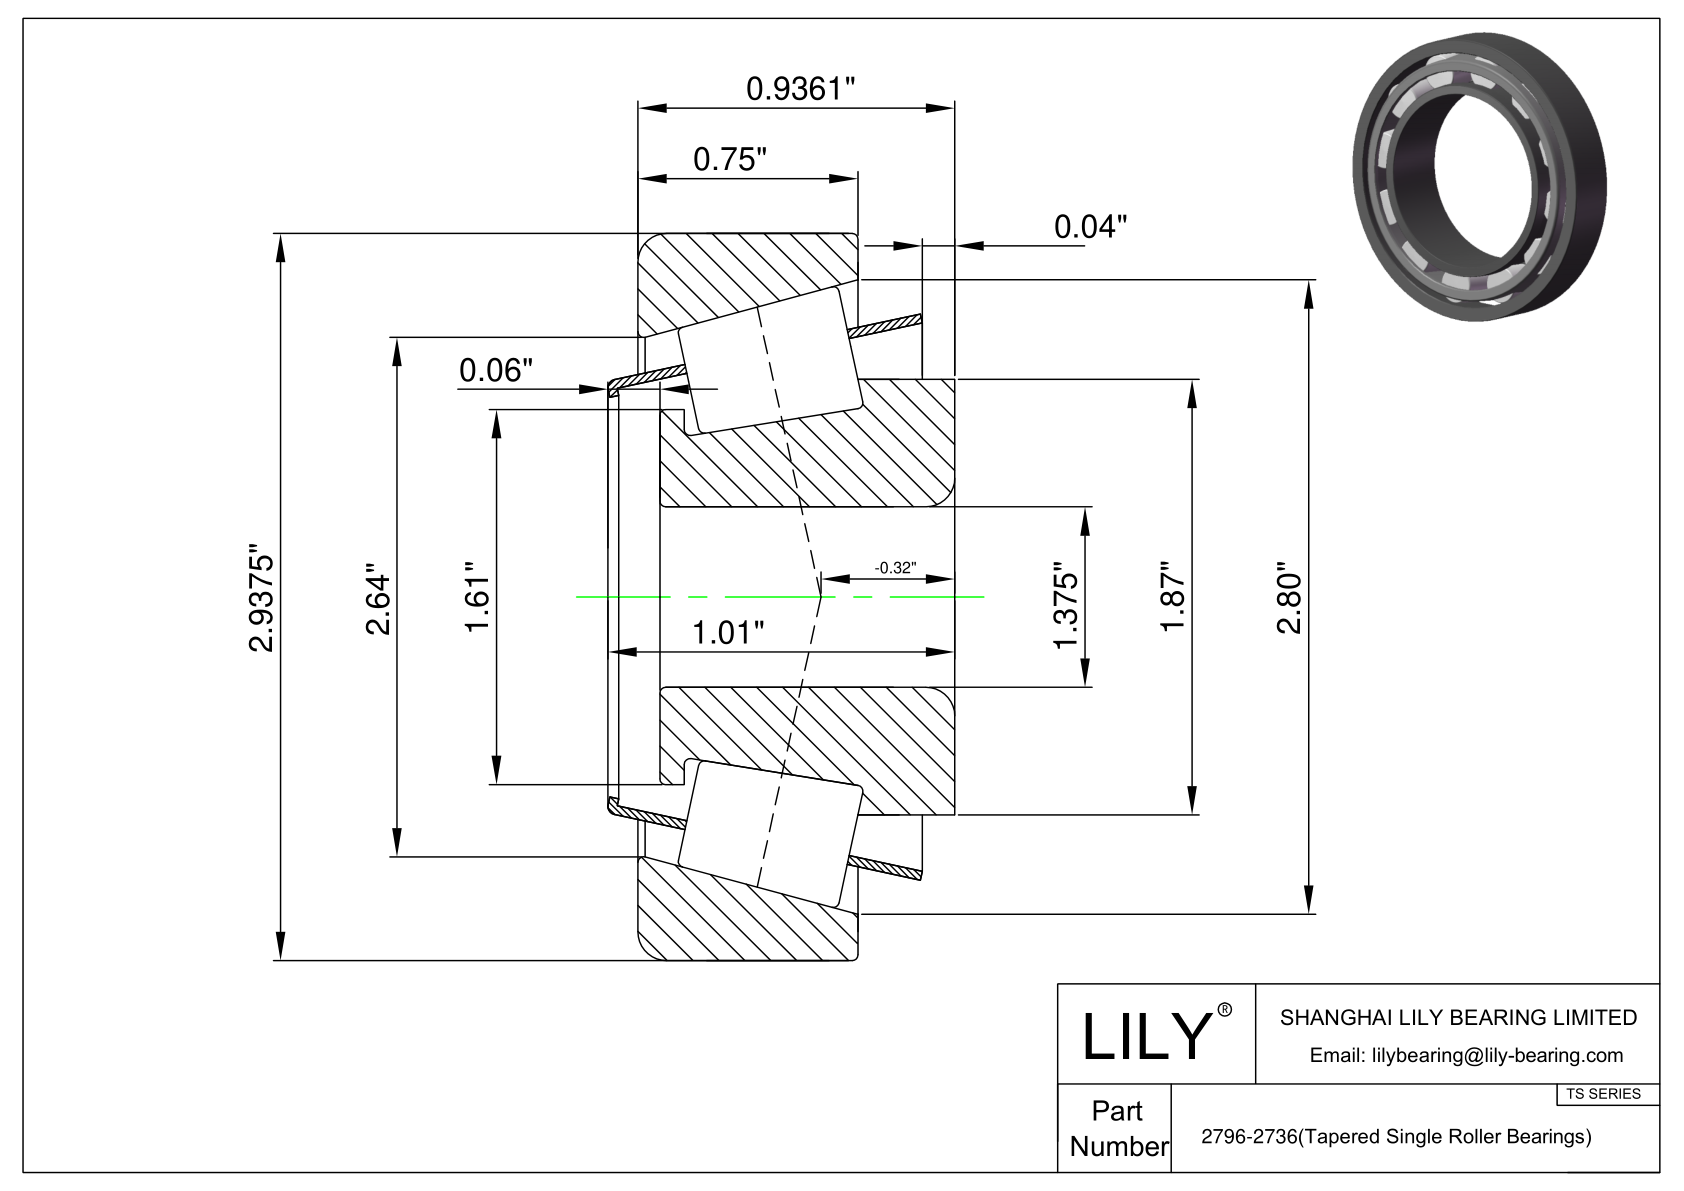 2796-2736 TS (Tapered Single Roller Bearings) (Imperial) cad drawing